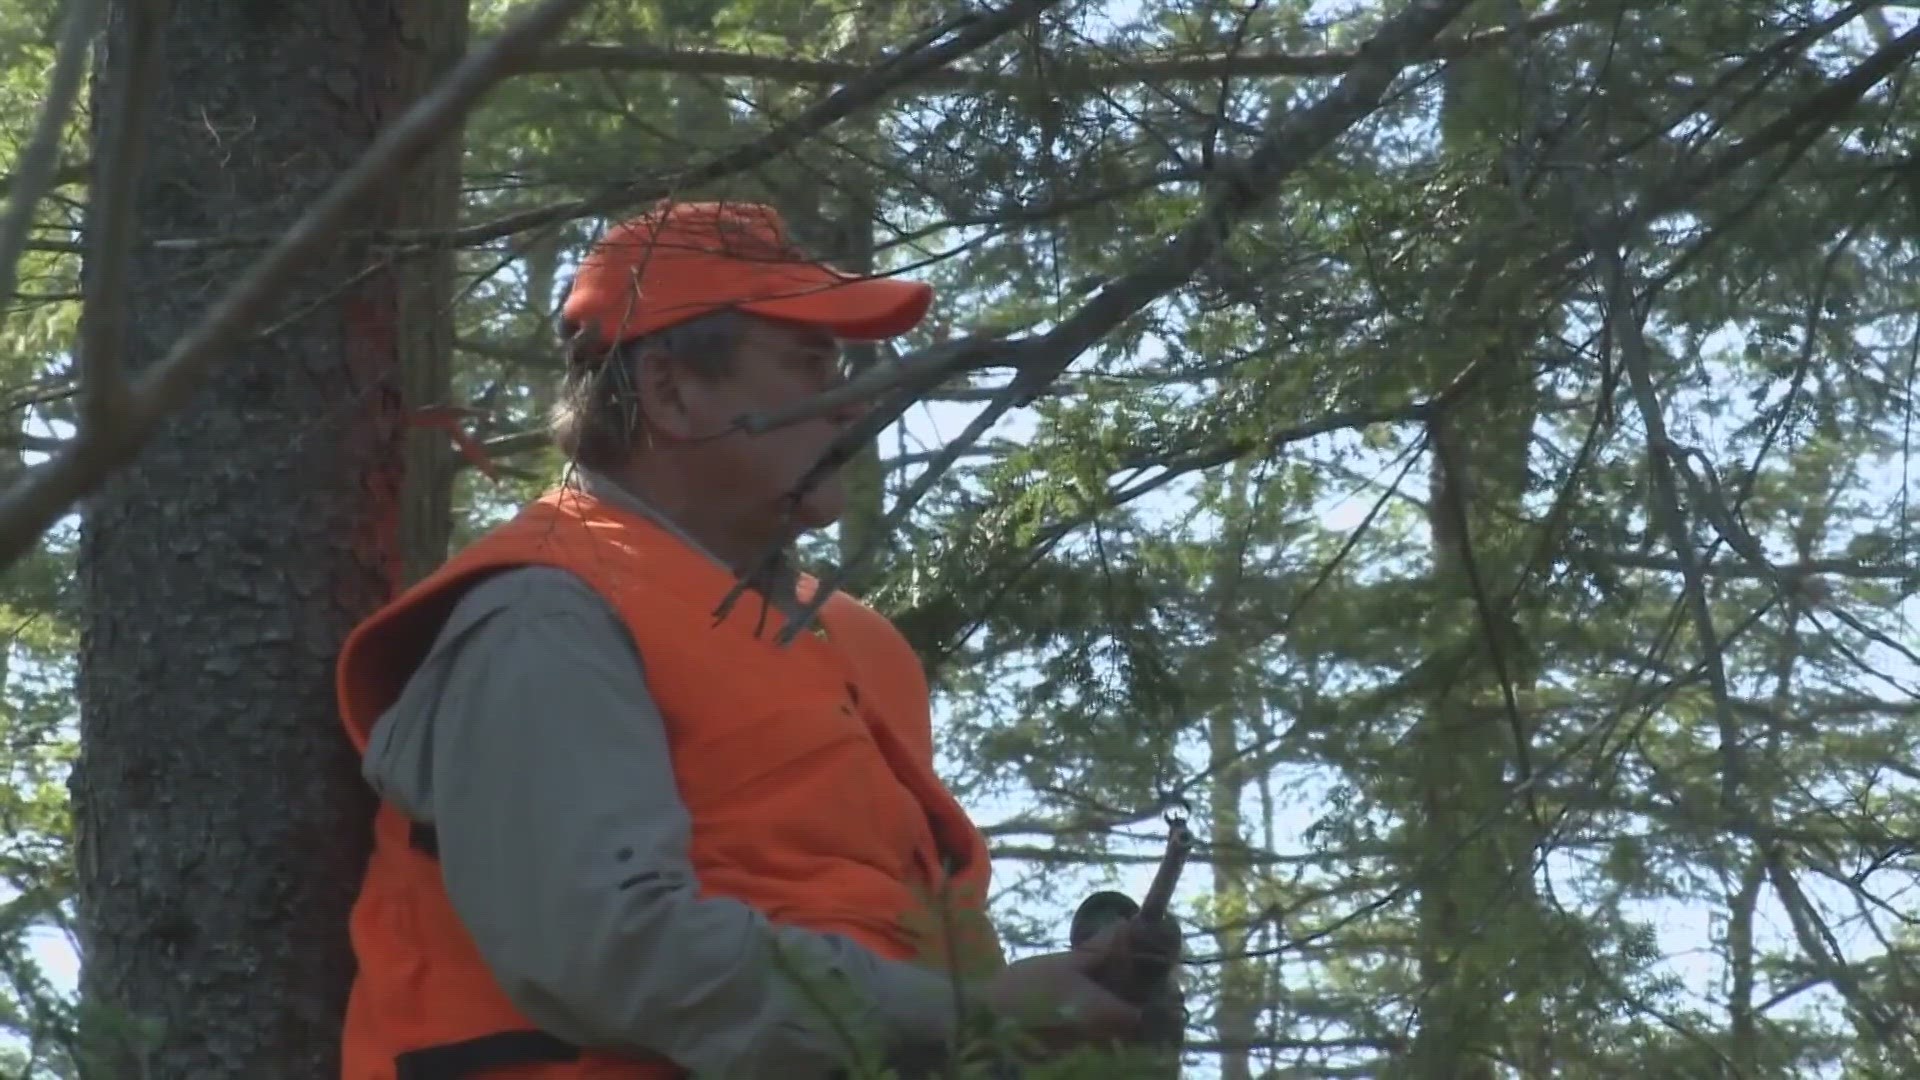 If passed, bow hunters would be able to opt into Sunday hunting while getting their regular permit.